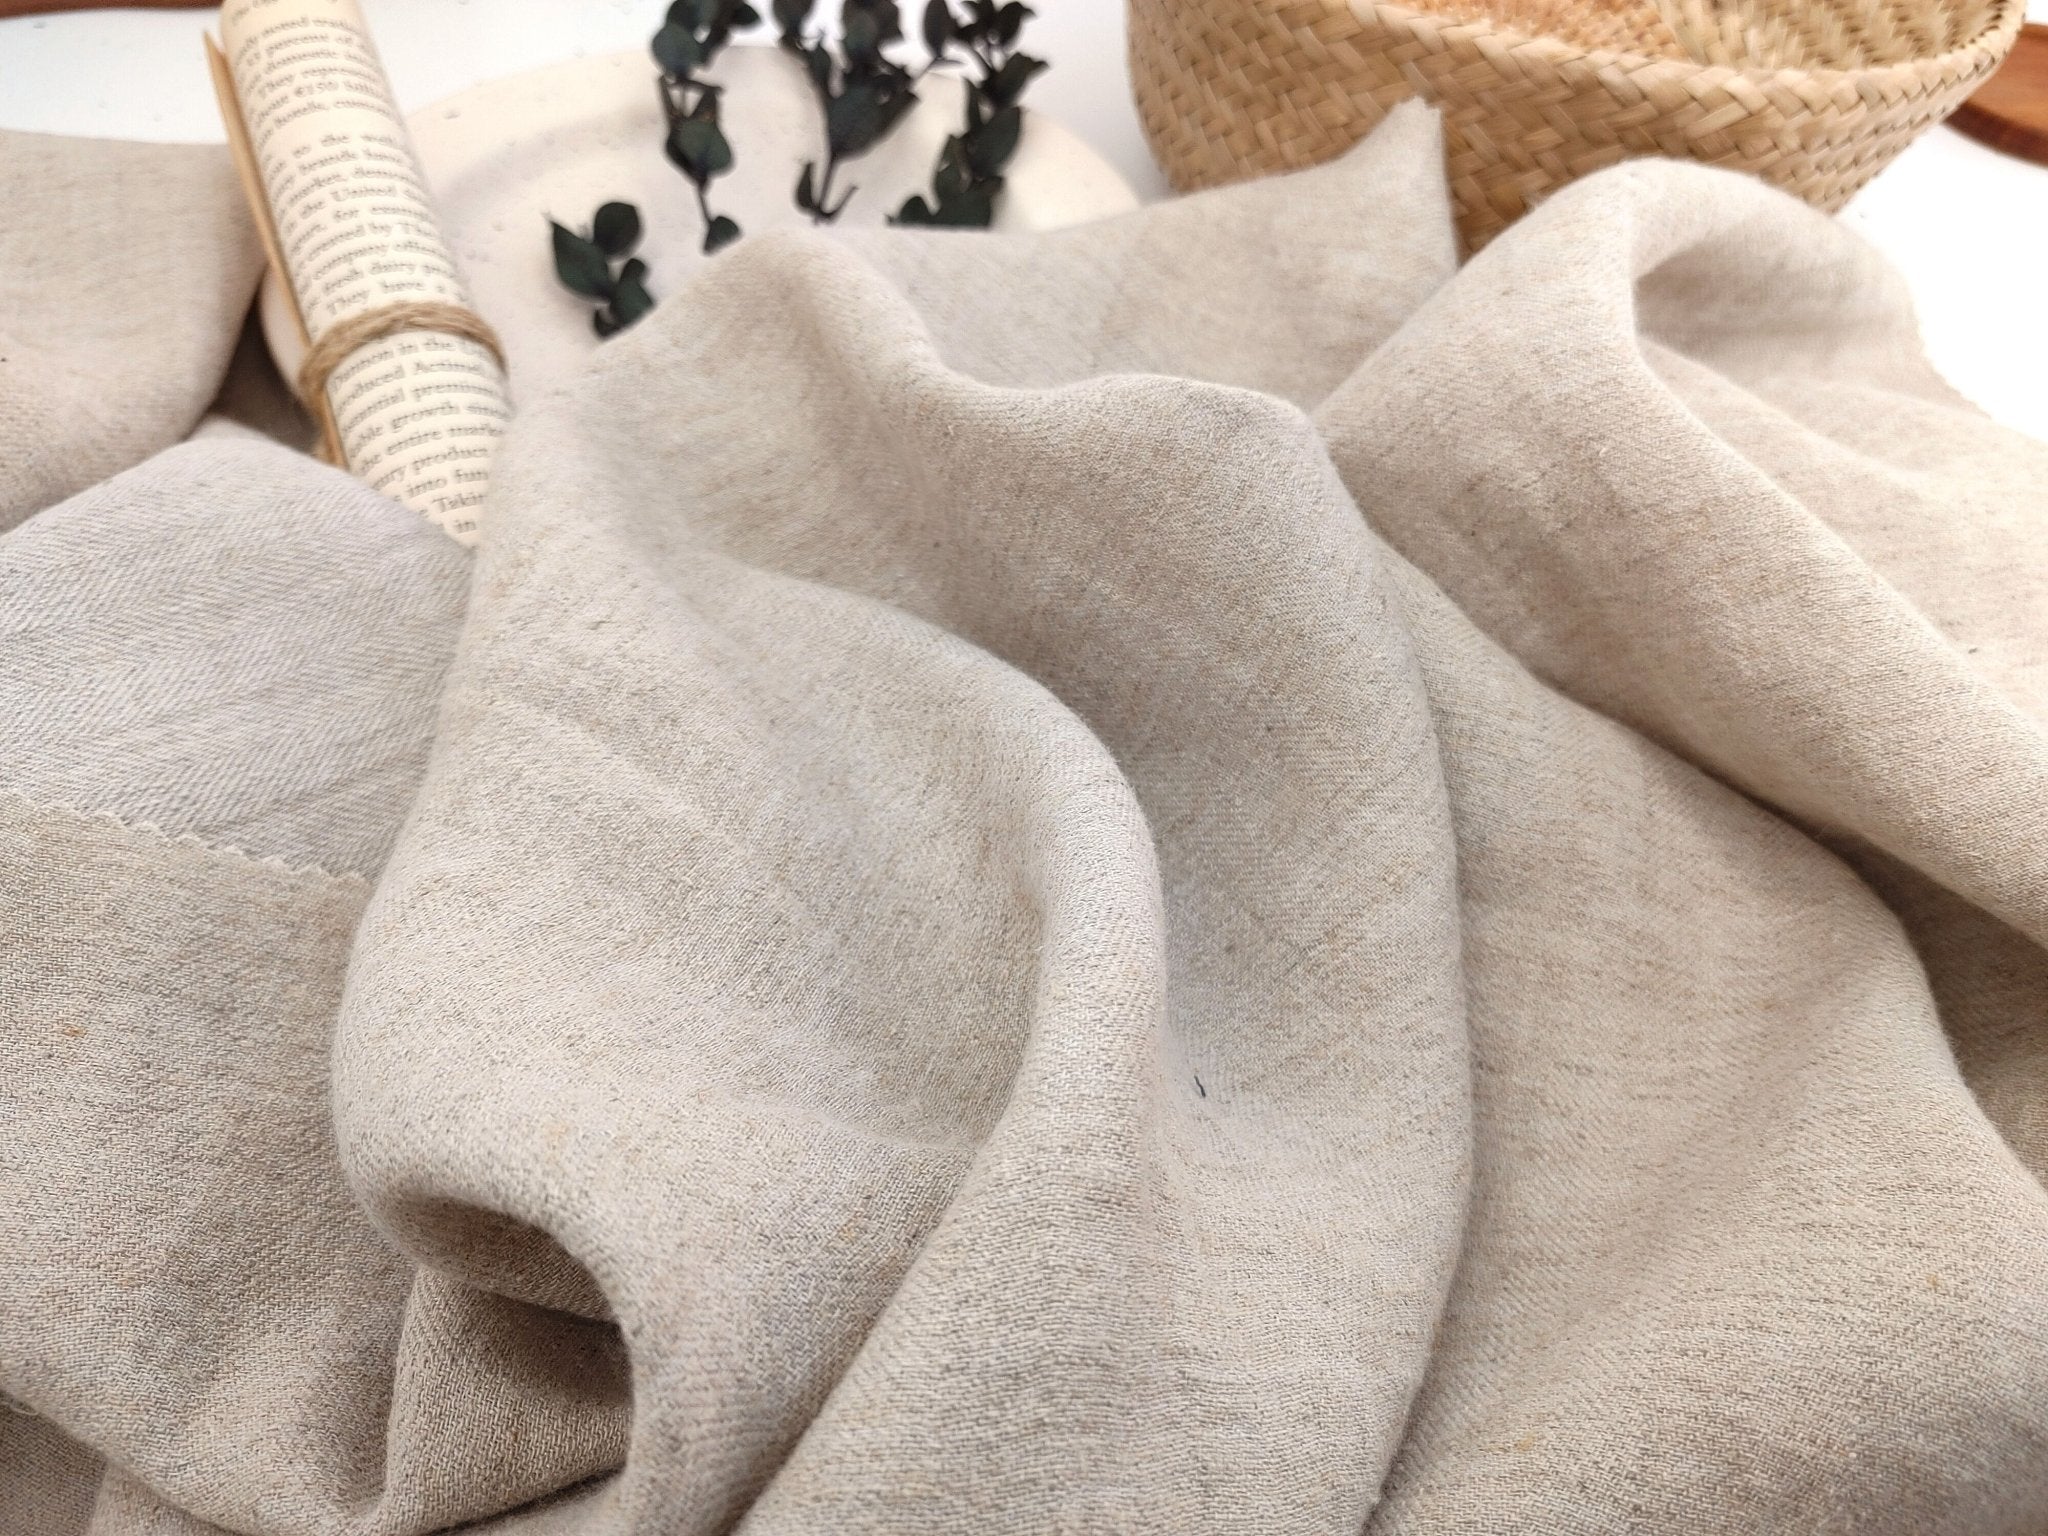 Harmony Hues: Natural Linen Polyester HBT Herringbone Twill Fabric 7730 - The Linen Lab - Natural